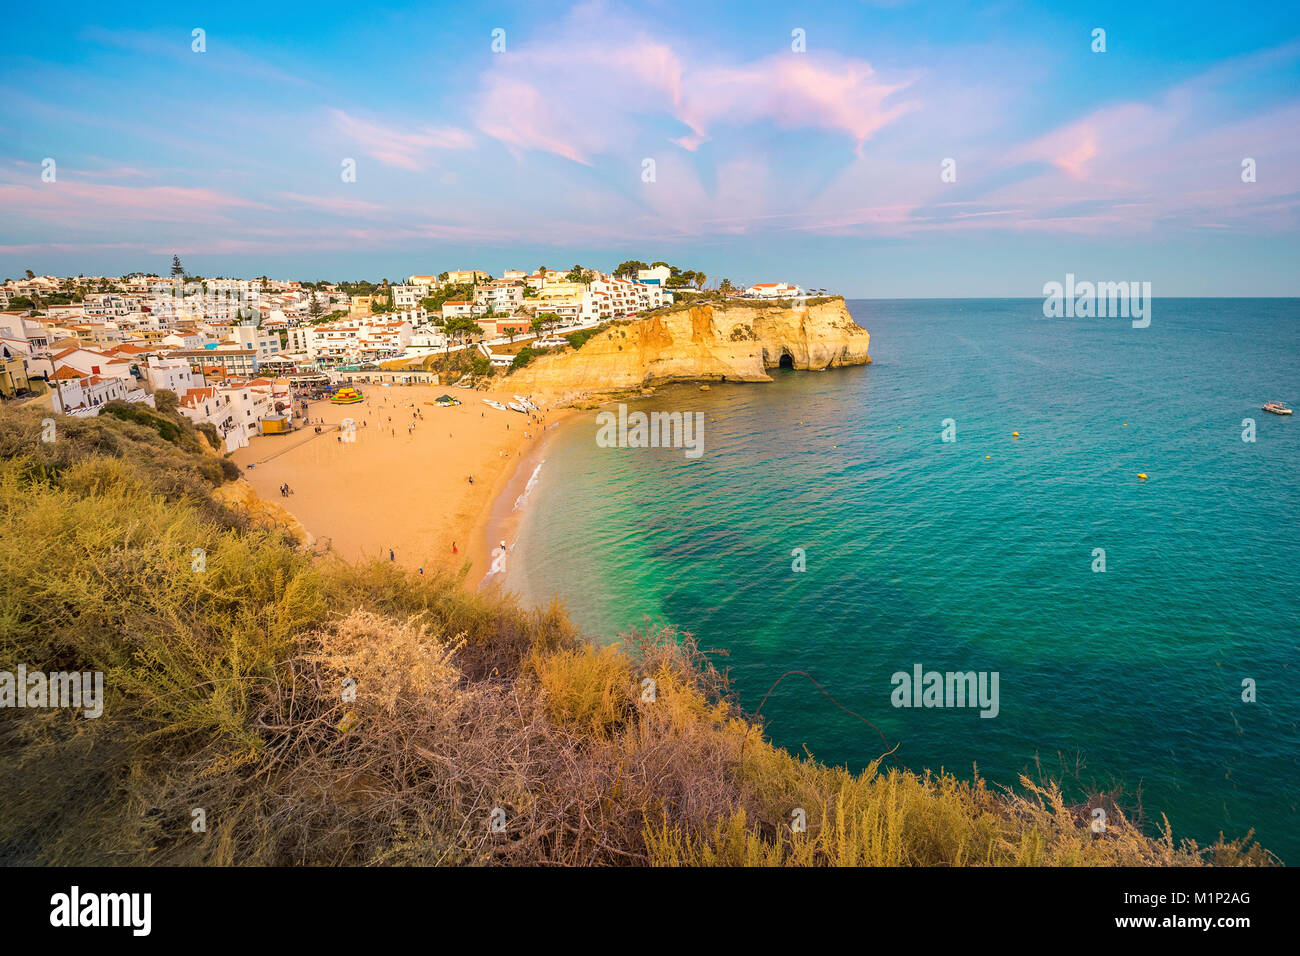 Overview with beach and cliff,Carvoeiro,Algarve,Portugal Stock Photo